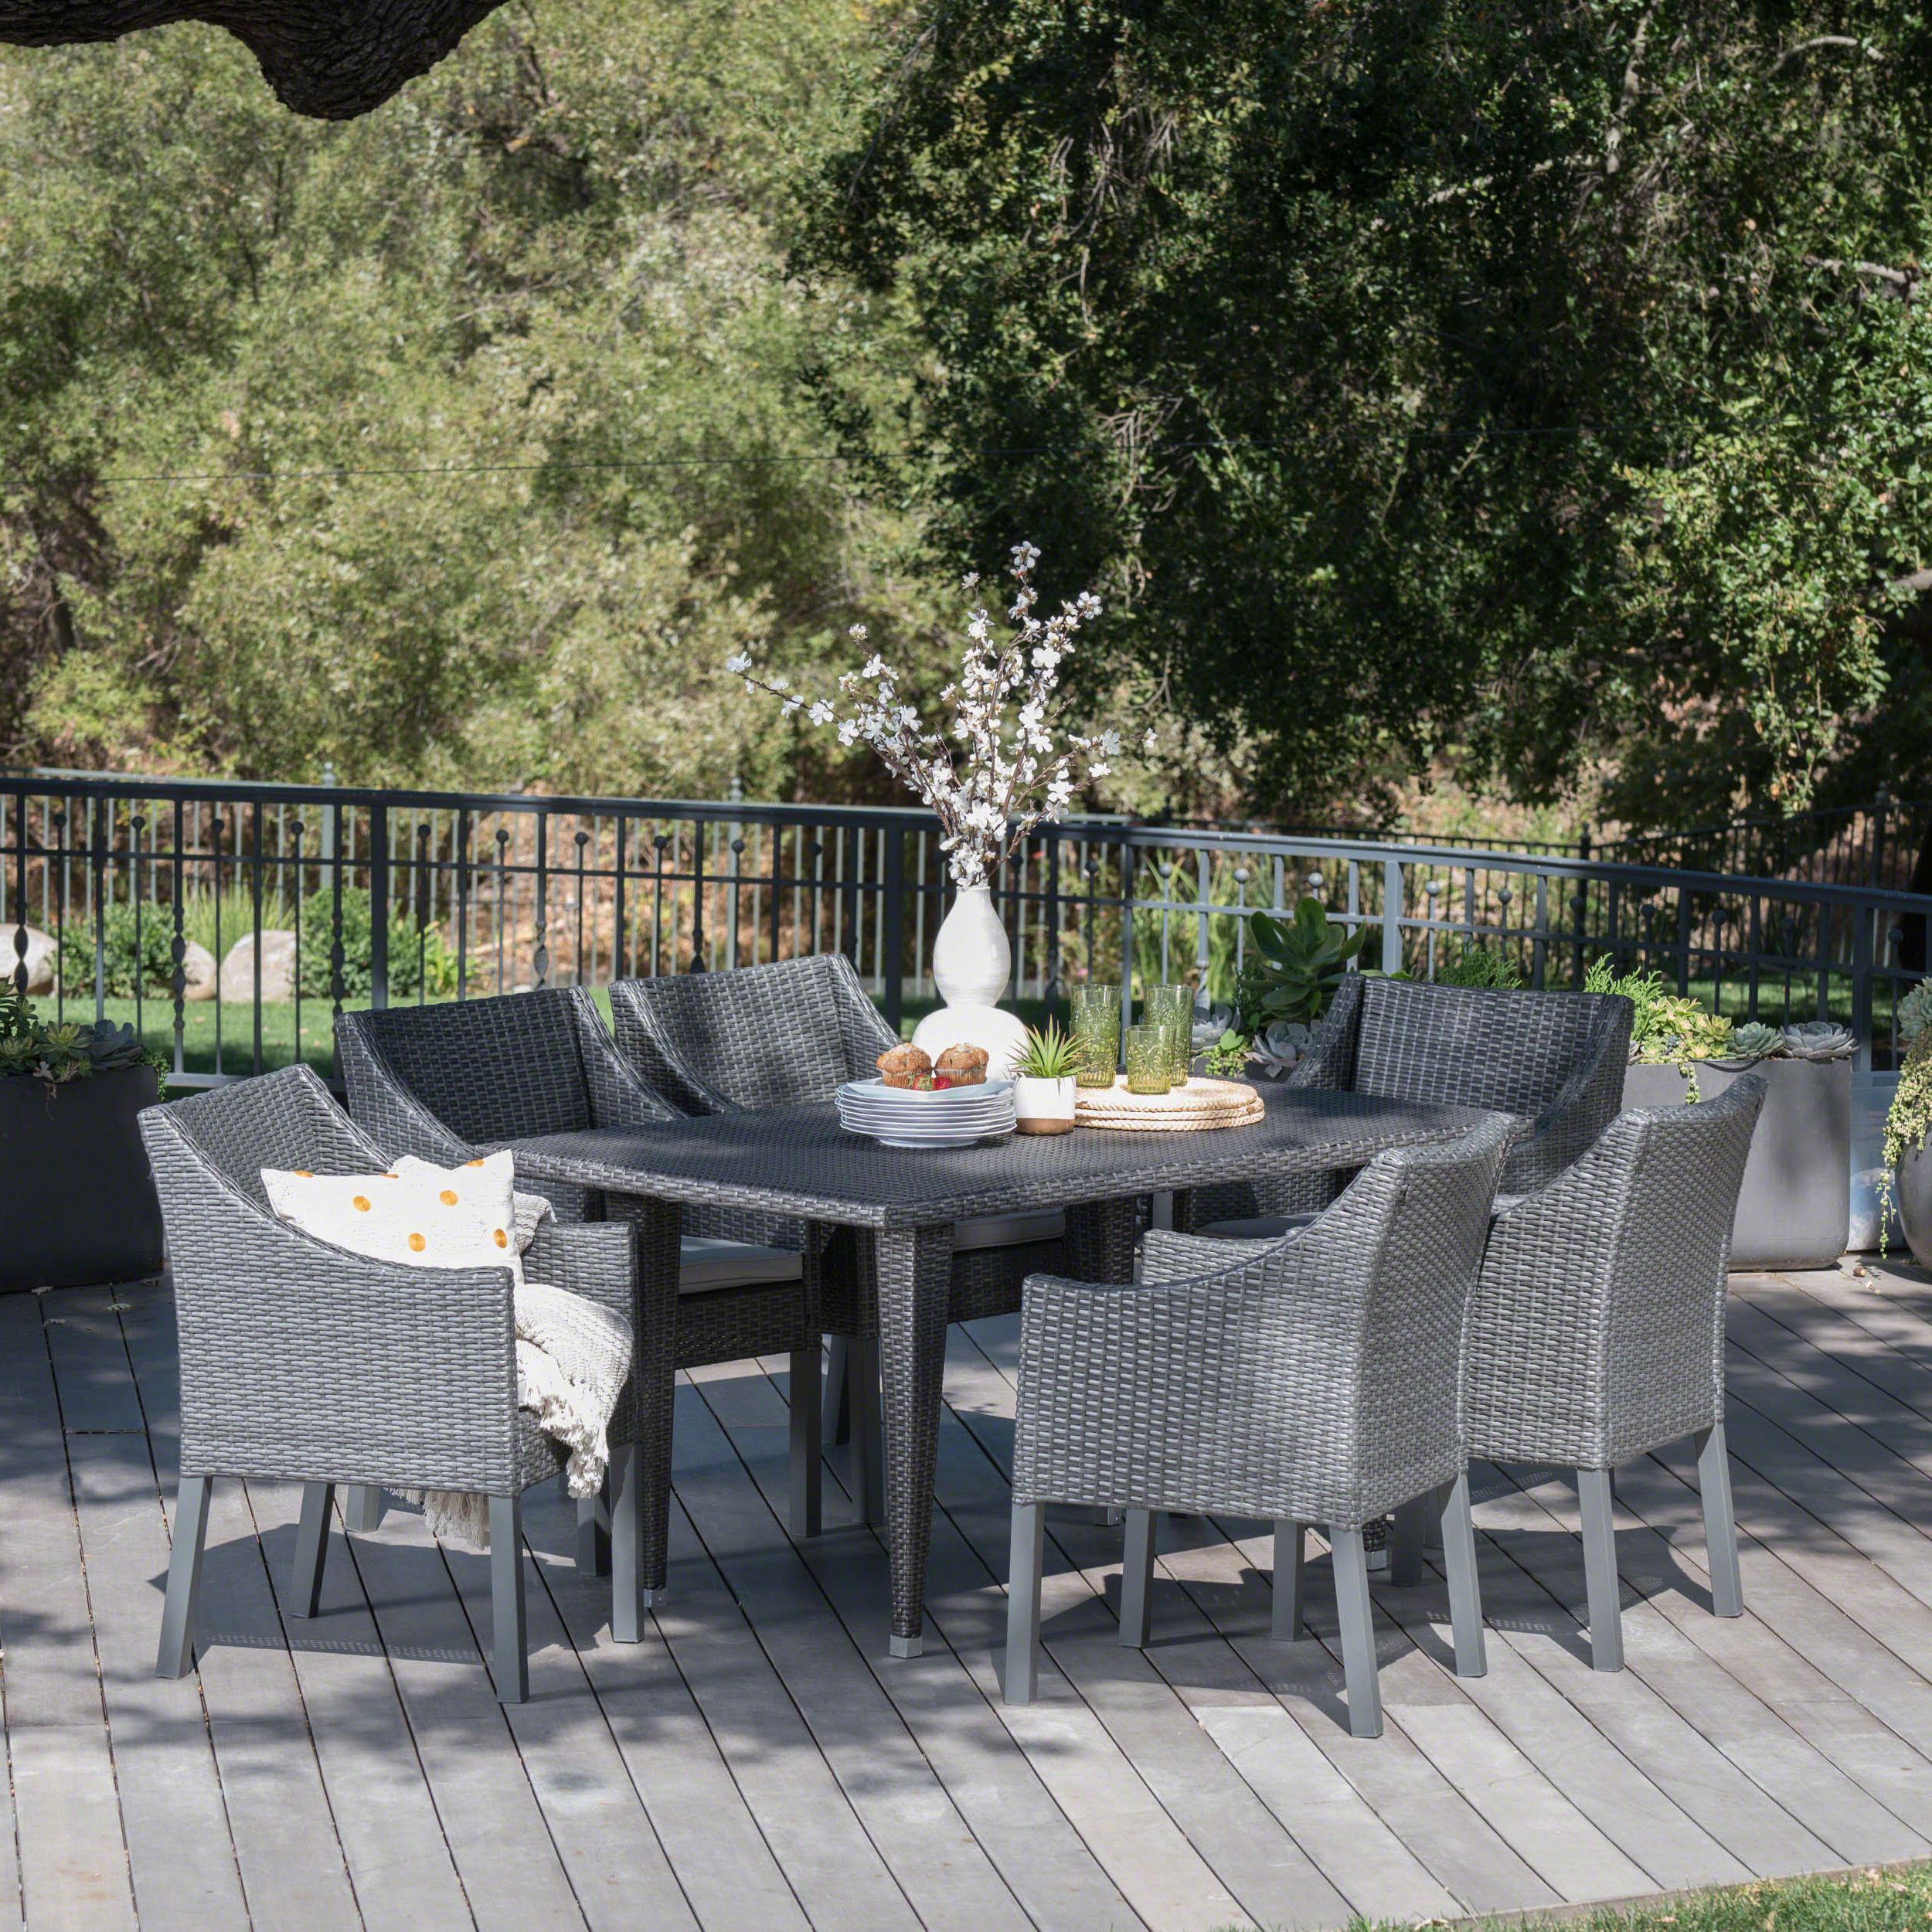 Famous 7 Piece Patio Dining Sets With Cushions For Alanna Outdoor 7 Piece Wicker Rectangular Dining Set With Water (View 11 of 15)